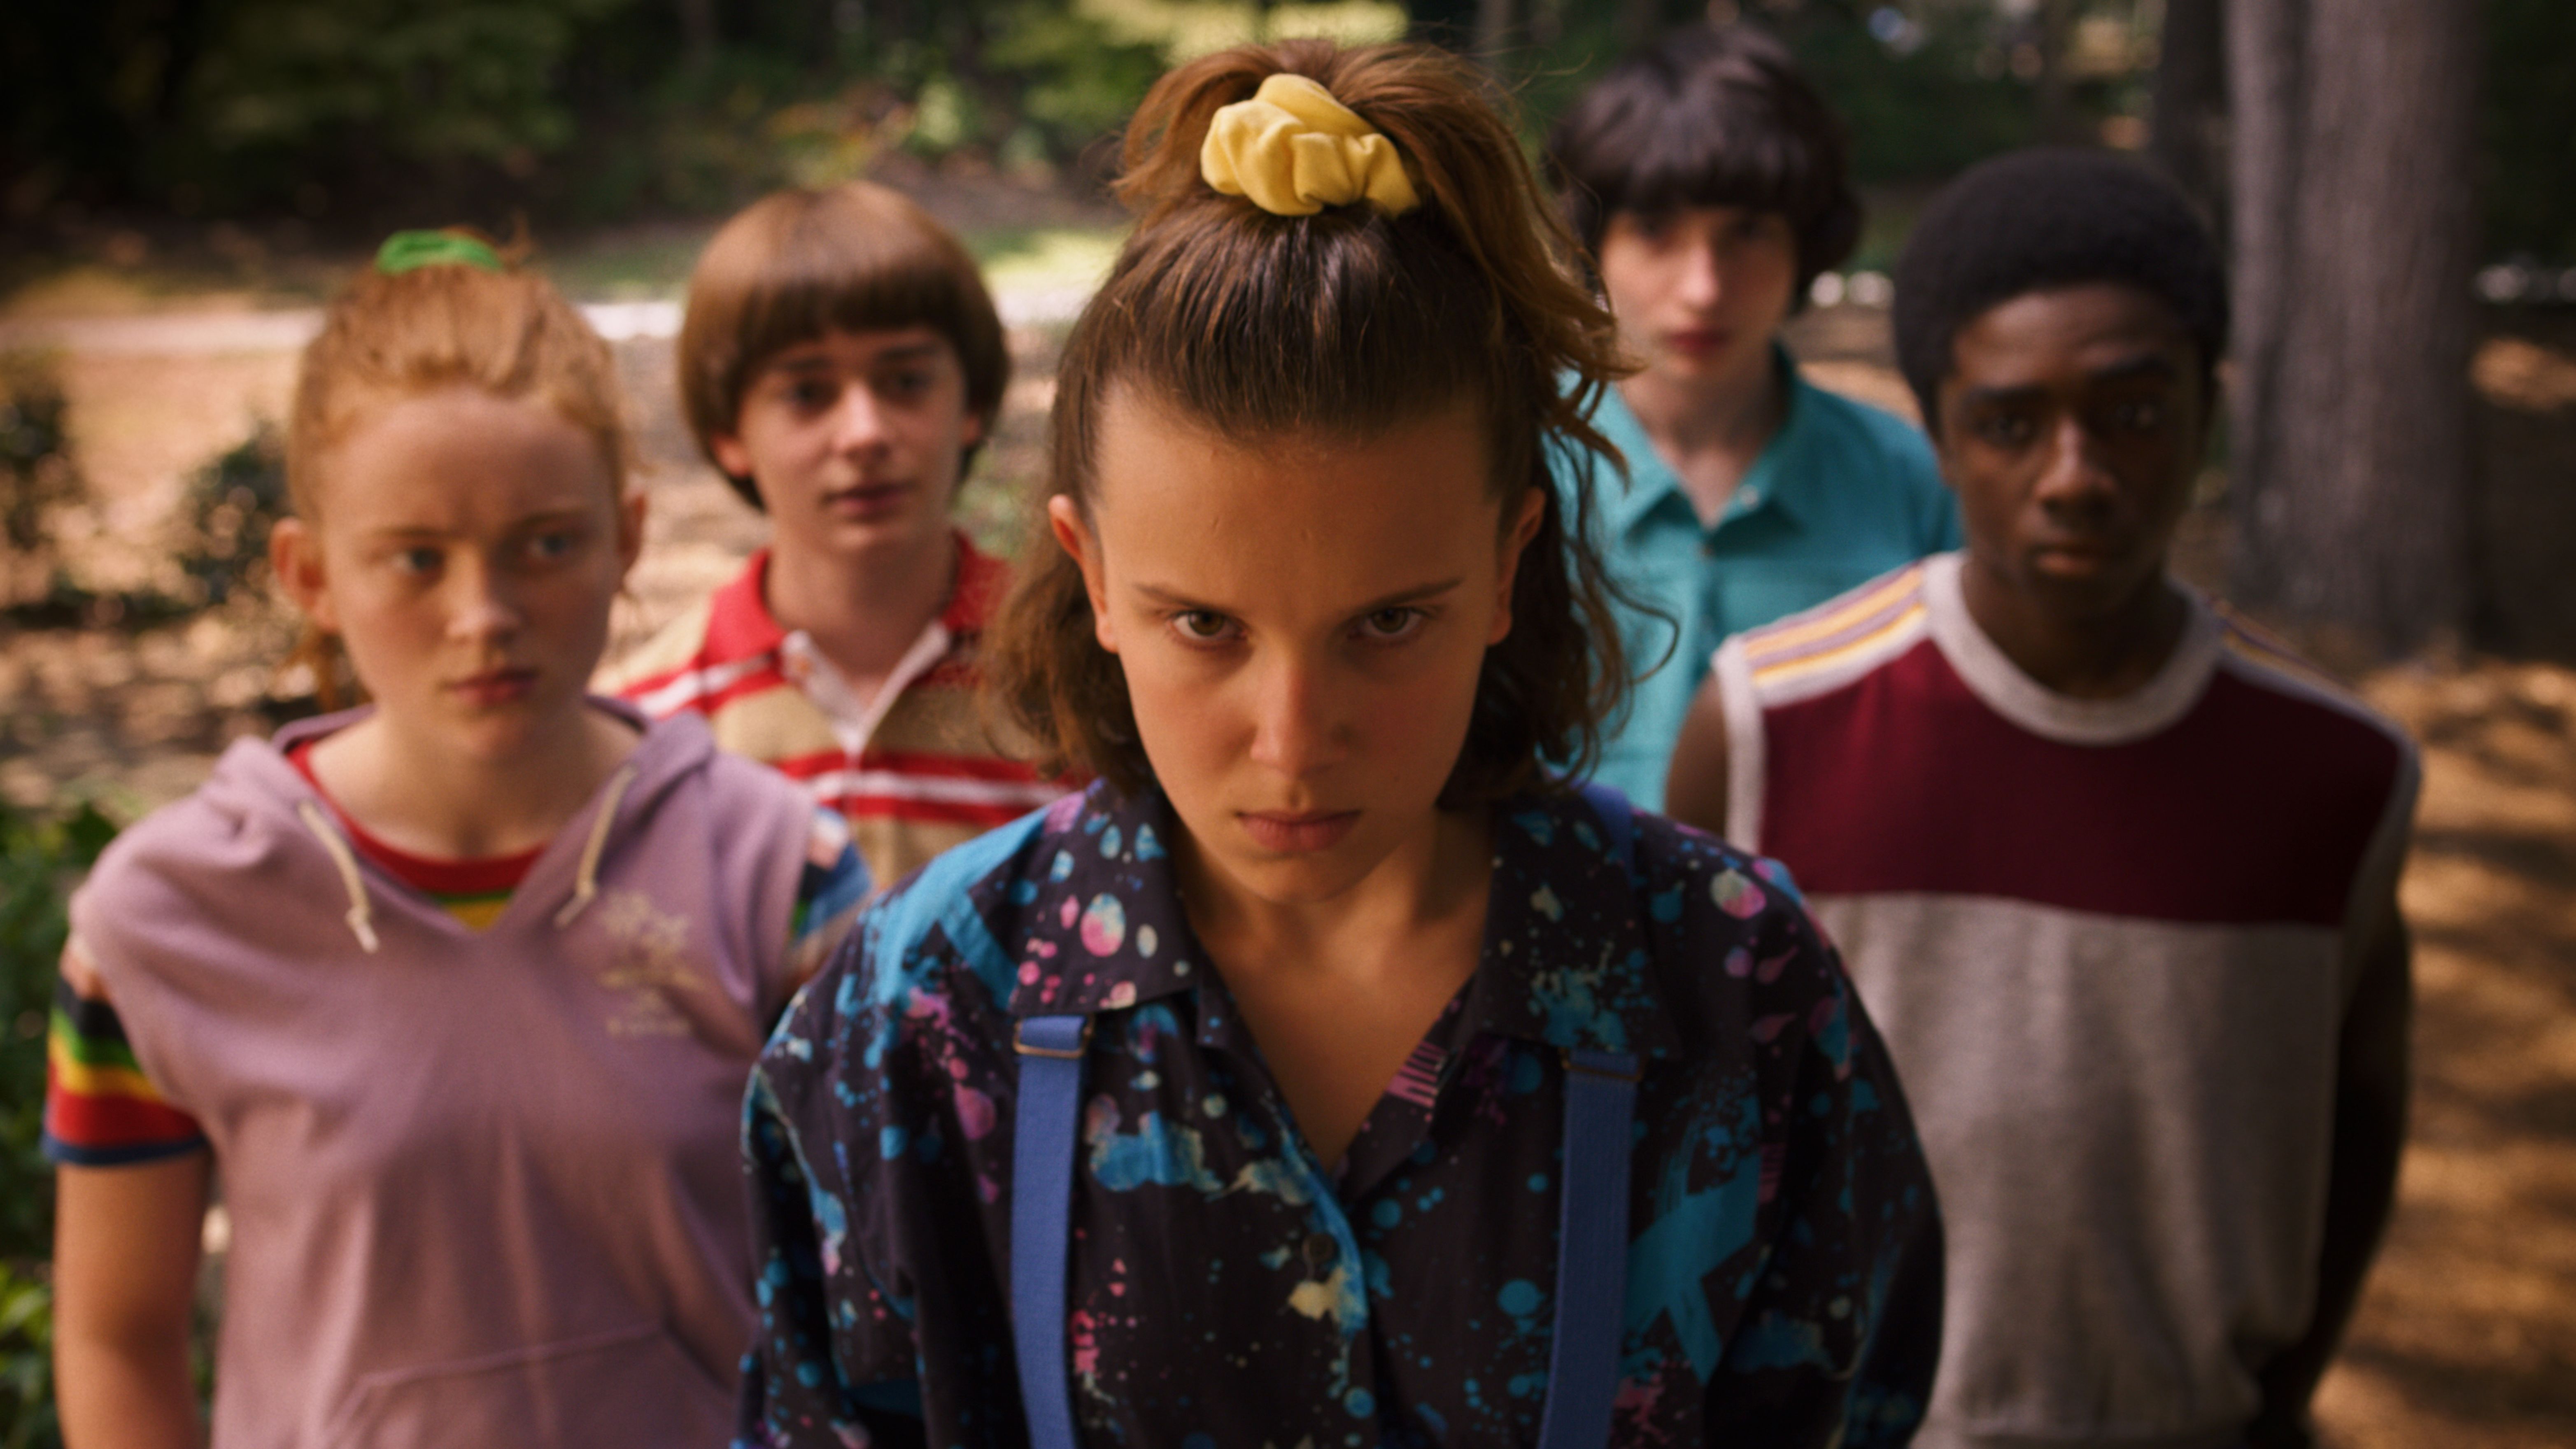 Stranger Things' Cool Things You Didn't Know About the Netflix Show